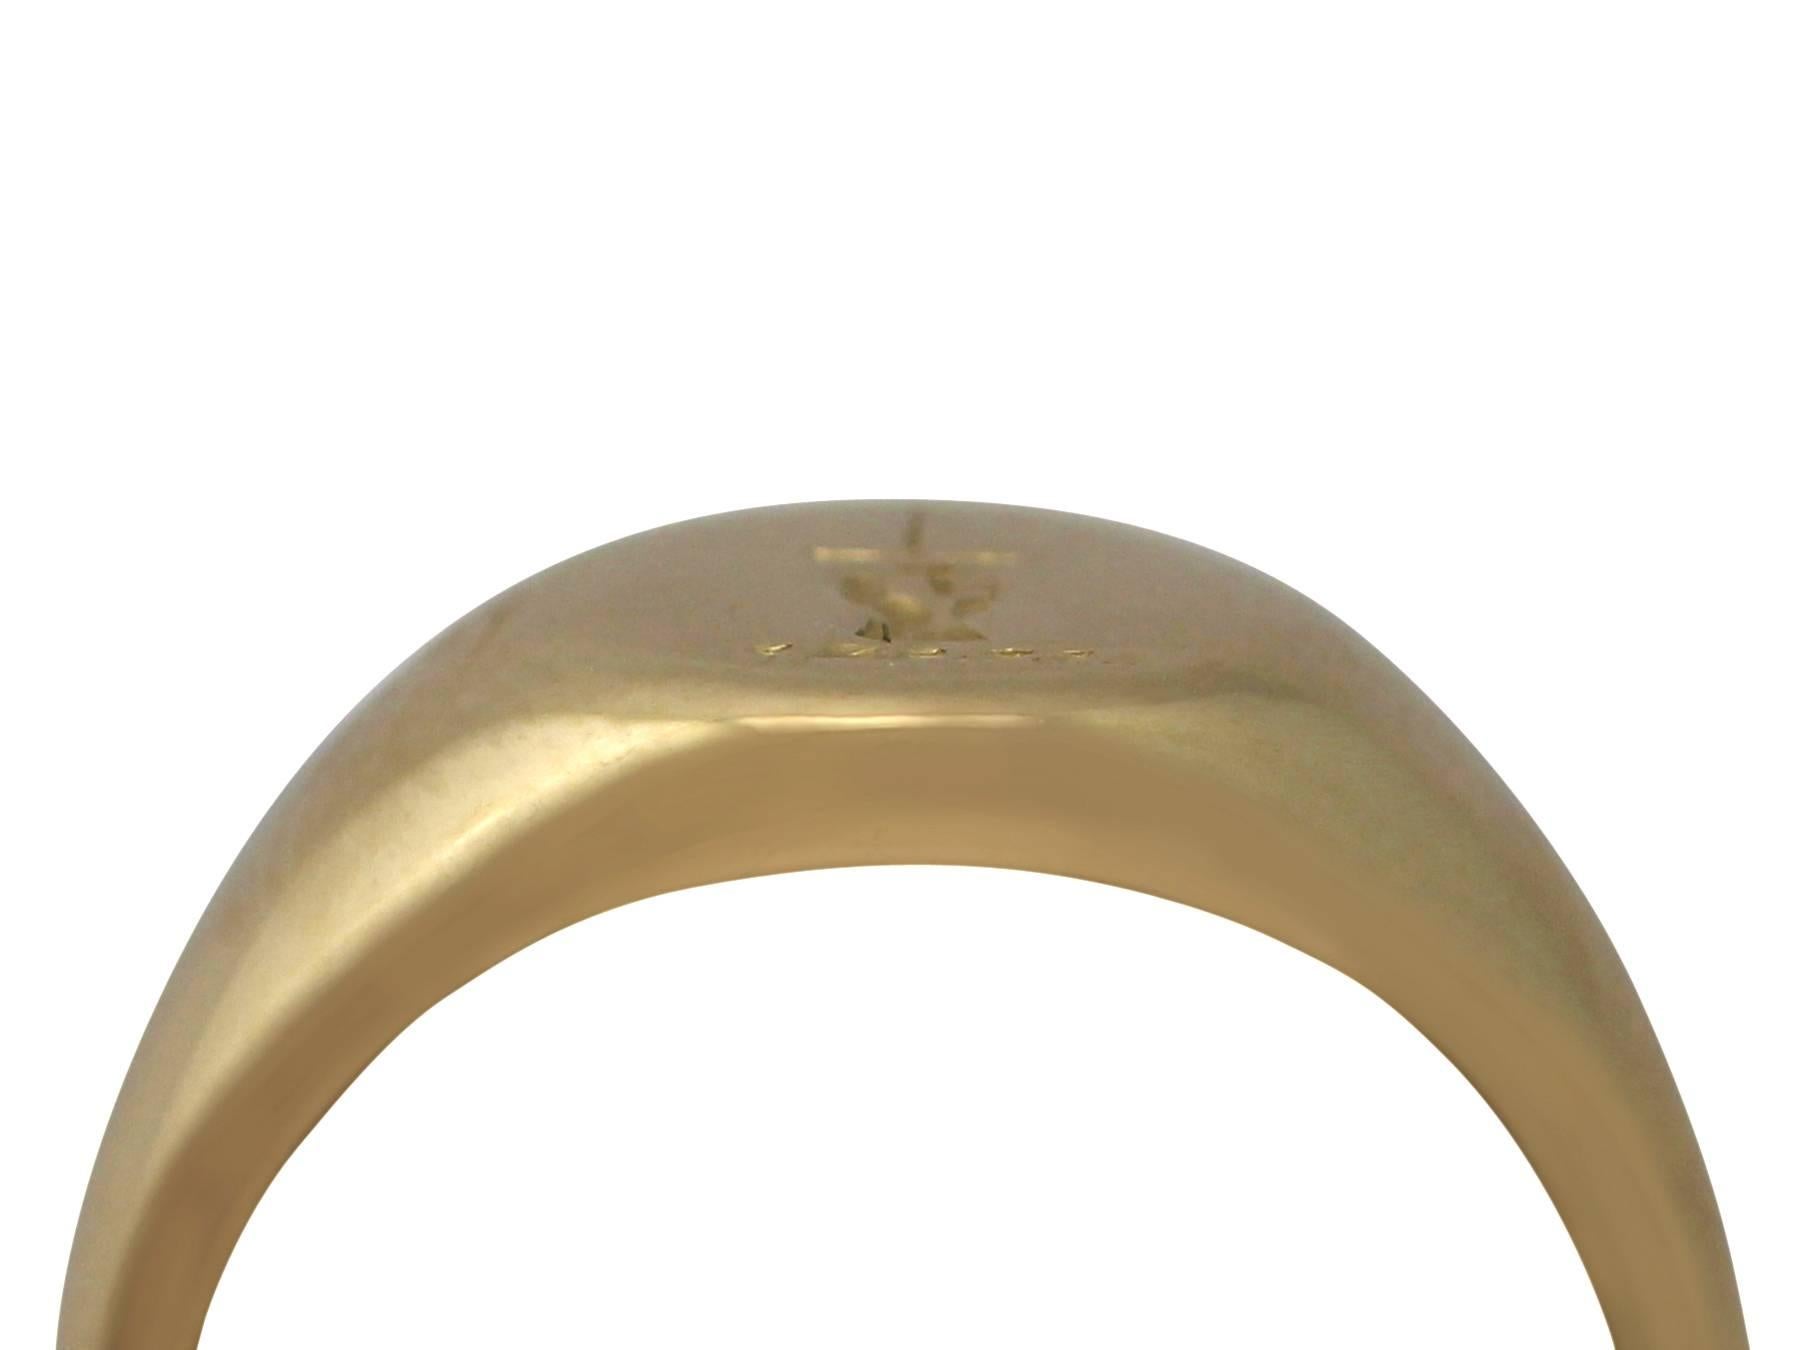 A fine and impressive 18 carat yellow gold signet ring: part of our gent's jewellery and estate jewelry collections

Description

This fine and impressive signet ring has been crafted in 18 ct yellow gold.

The oval face of this armigerous